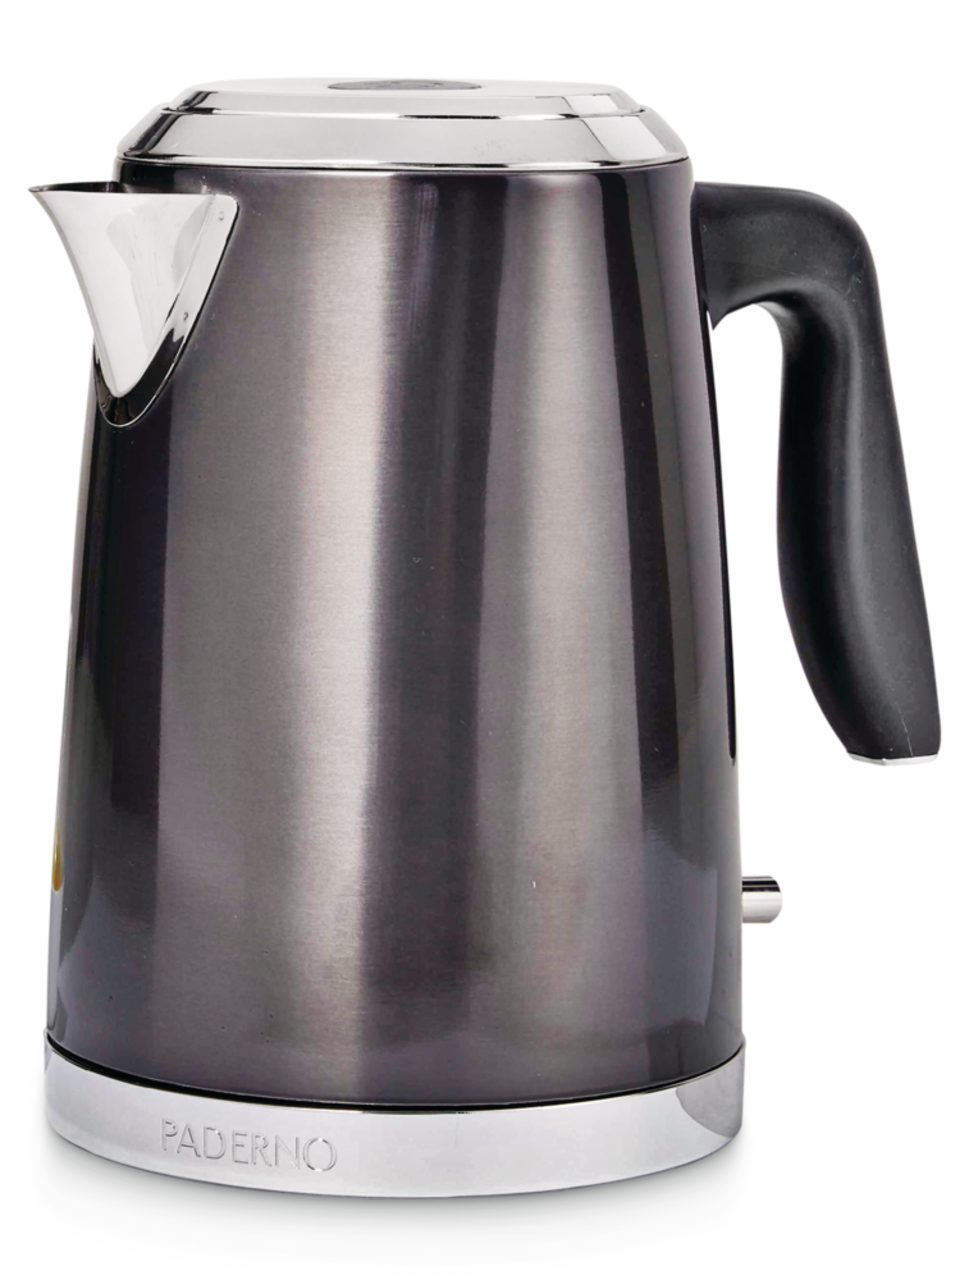 https://media-www.canadiantire.ca/product/living/kitchen/kitchen-appliances/0435263/paderno-1-7-litre-electric-kettle-black-stainless-steel-3825873c-f76d-4051-8c9d-b27880a08f0a.png?imdensity=1&imwidth=640&impolicy=mZoom